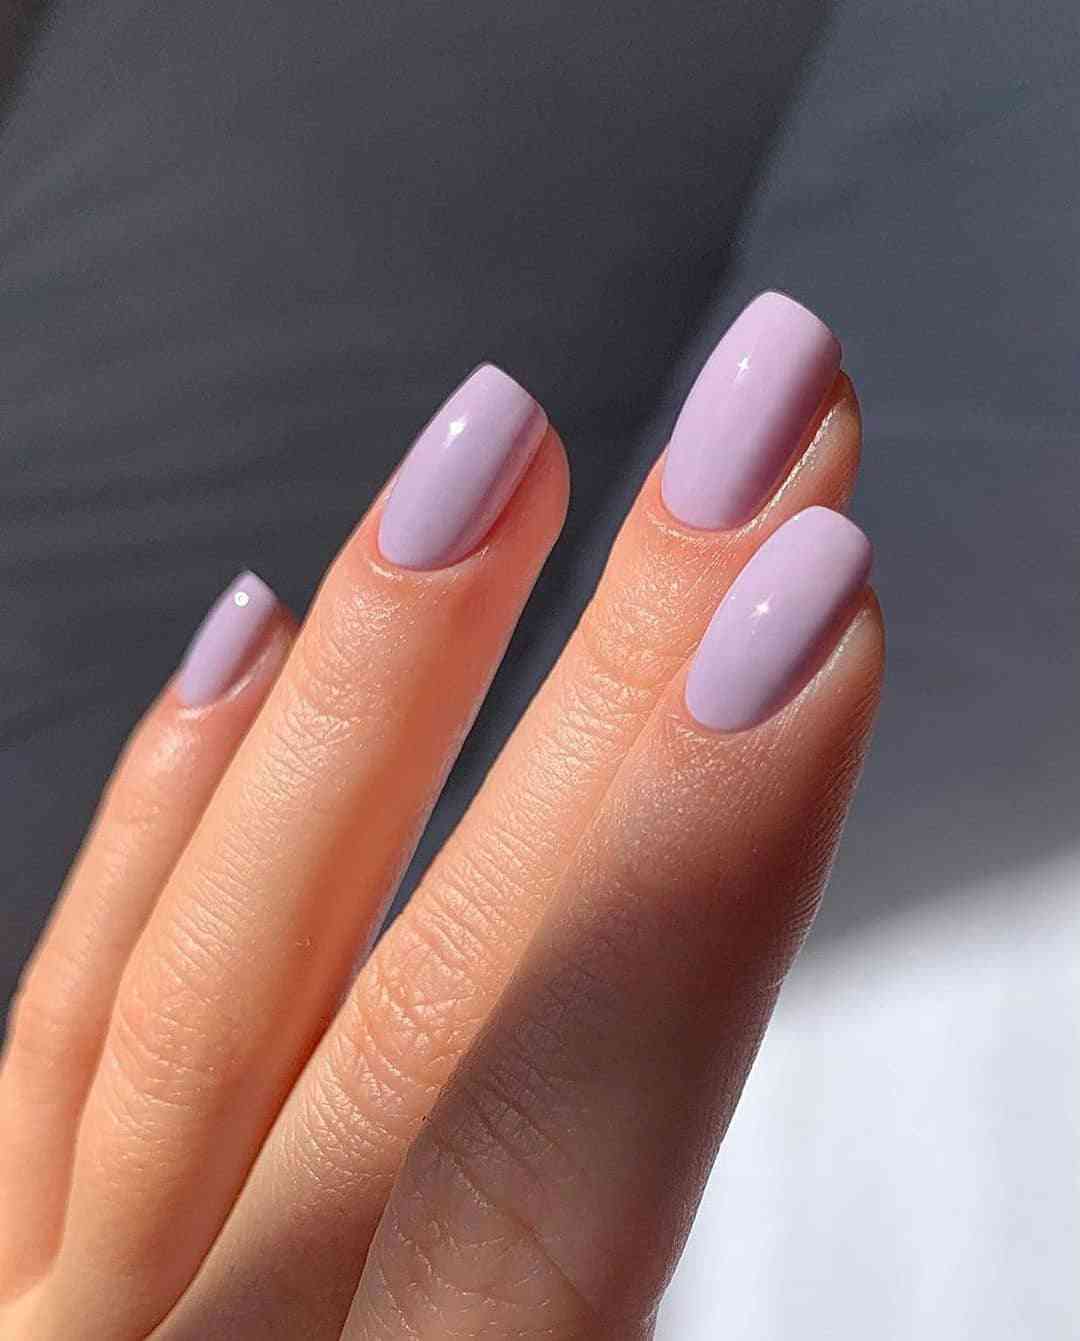 50+ Beautiful Summer Nail Designs For Women In 2021 images 45